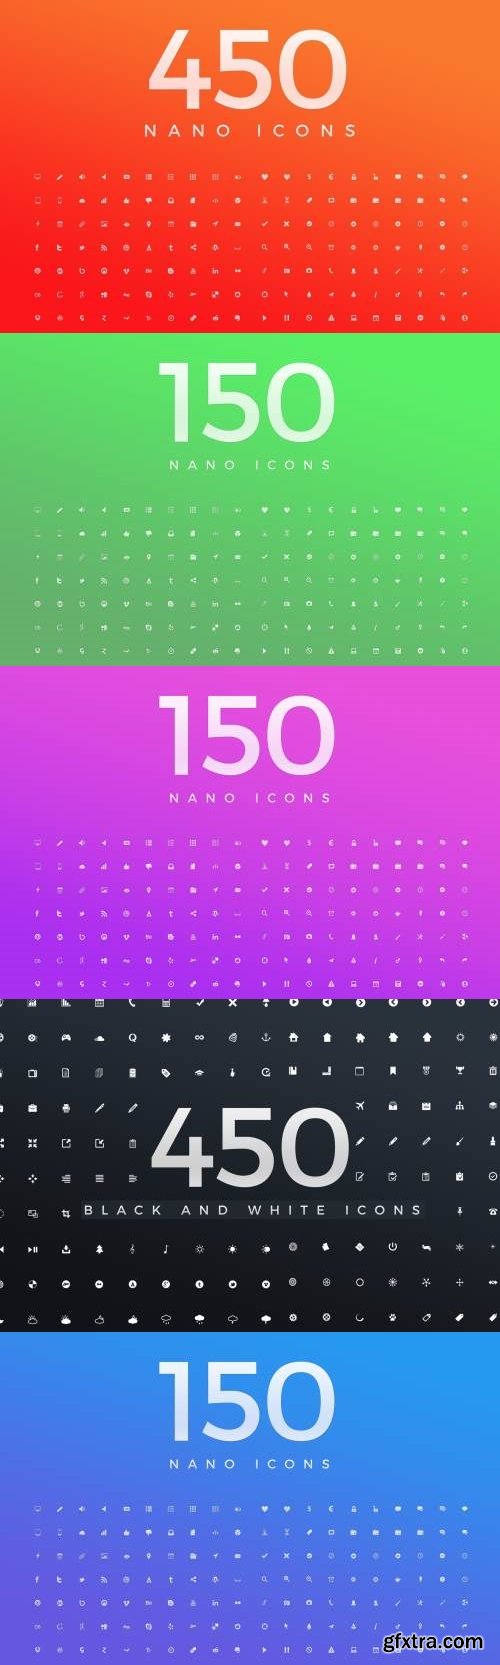 1000 + Black and White Vector Icons